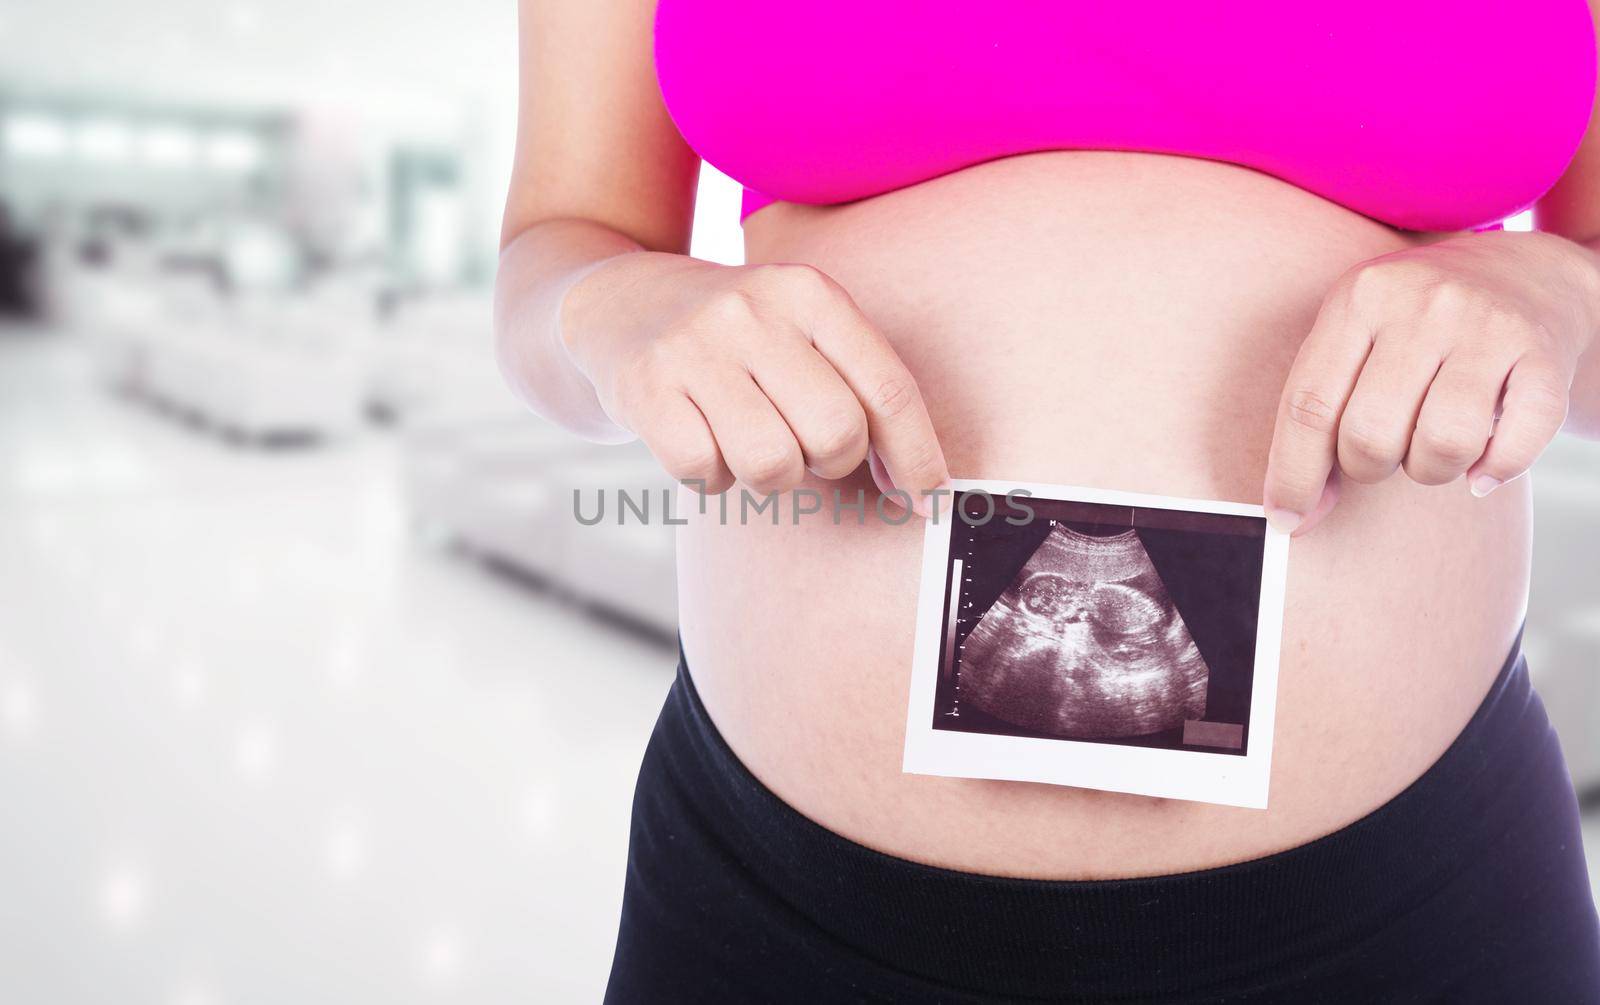 Pregnant woman hands holding ultrasound photo in hospital background by geargodz